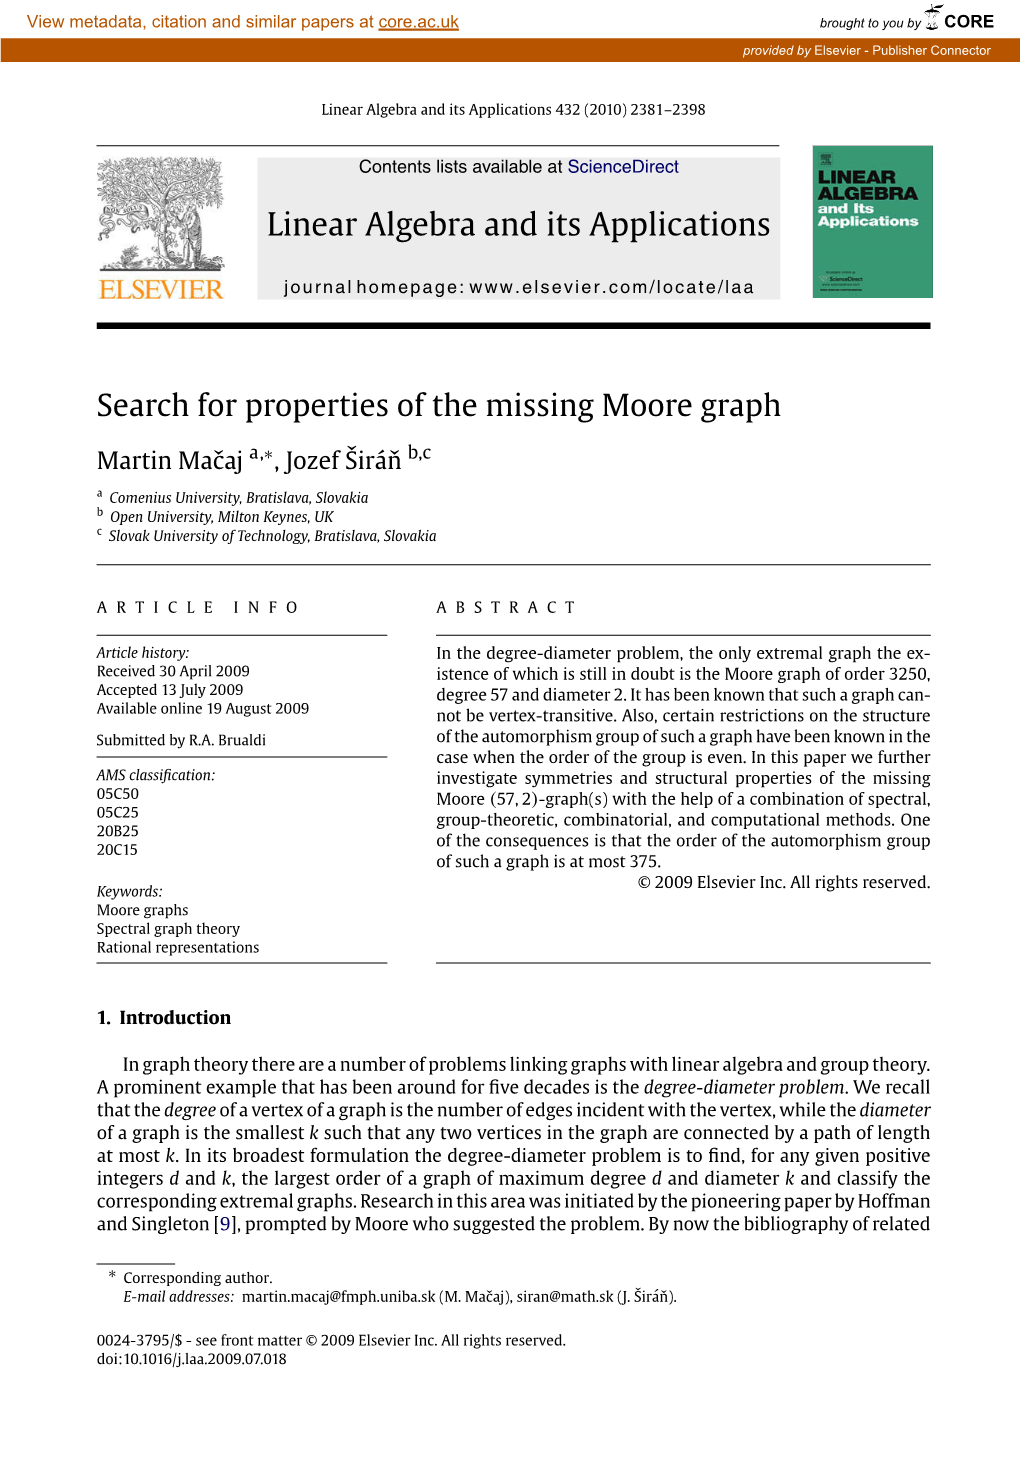 Search for Properties of the Missing Moore Graph